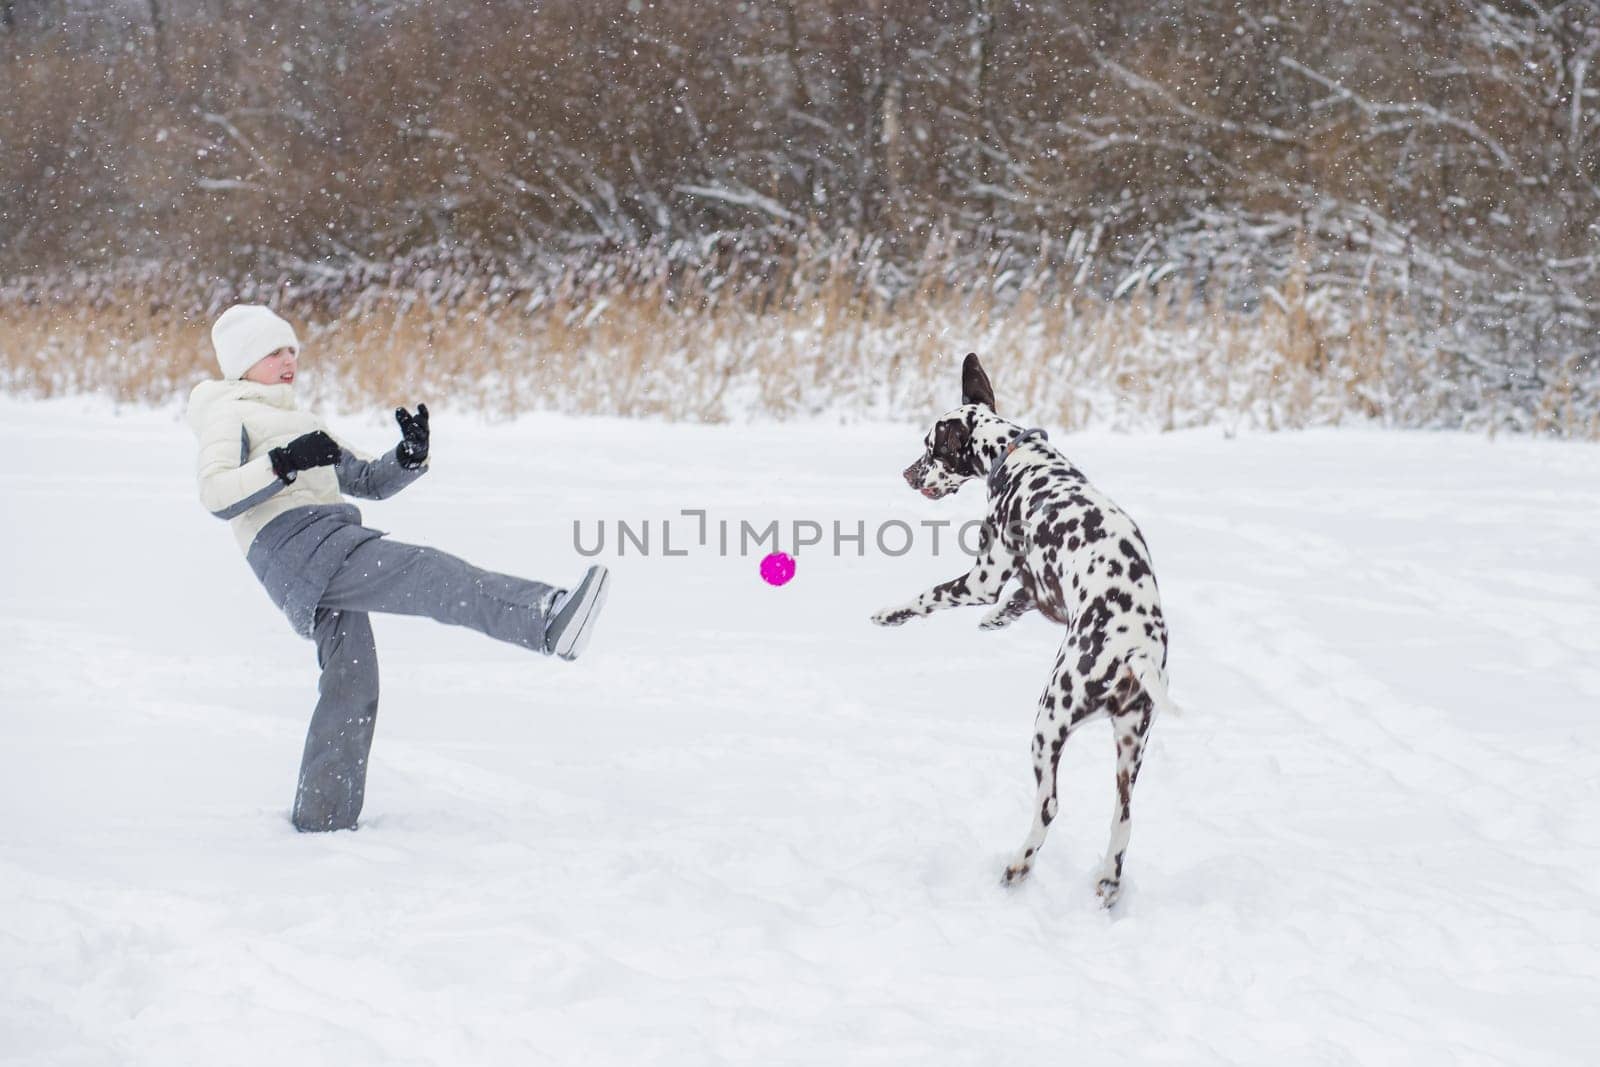 Young girl portrait in pink hat playing active game with her dog golden retriever in winter season